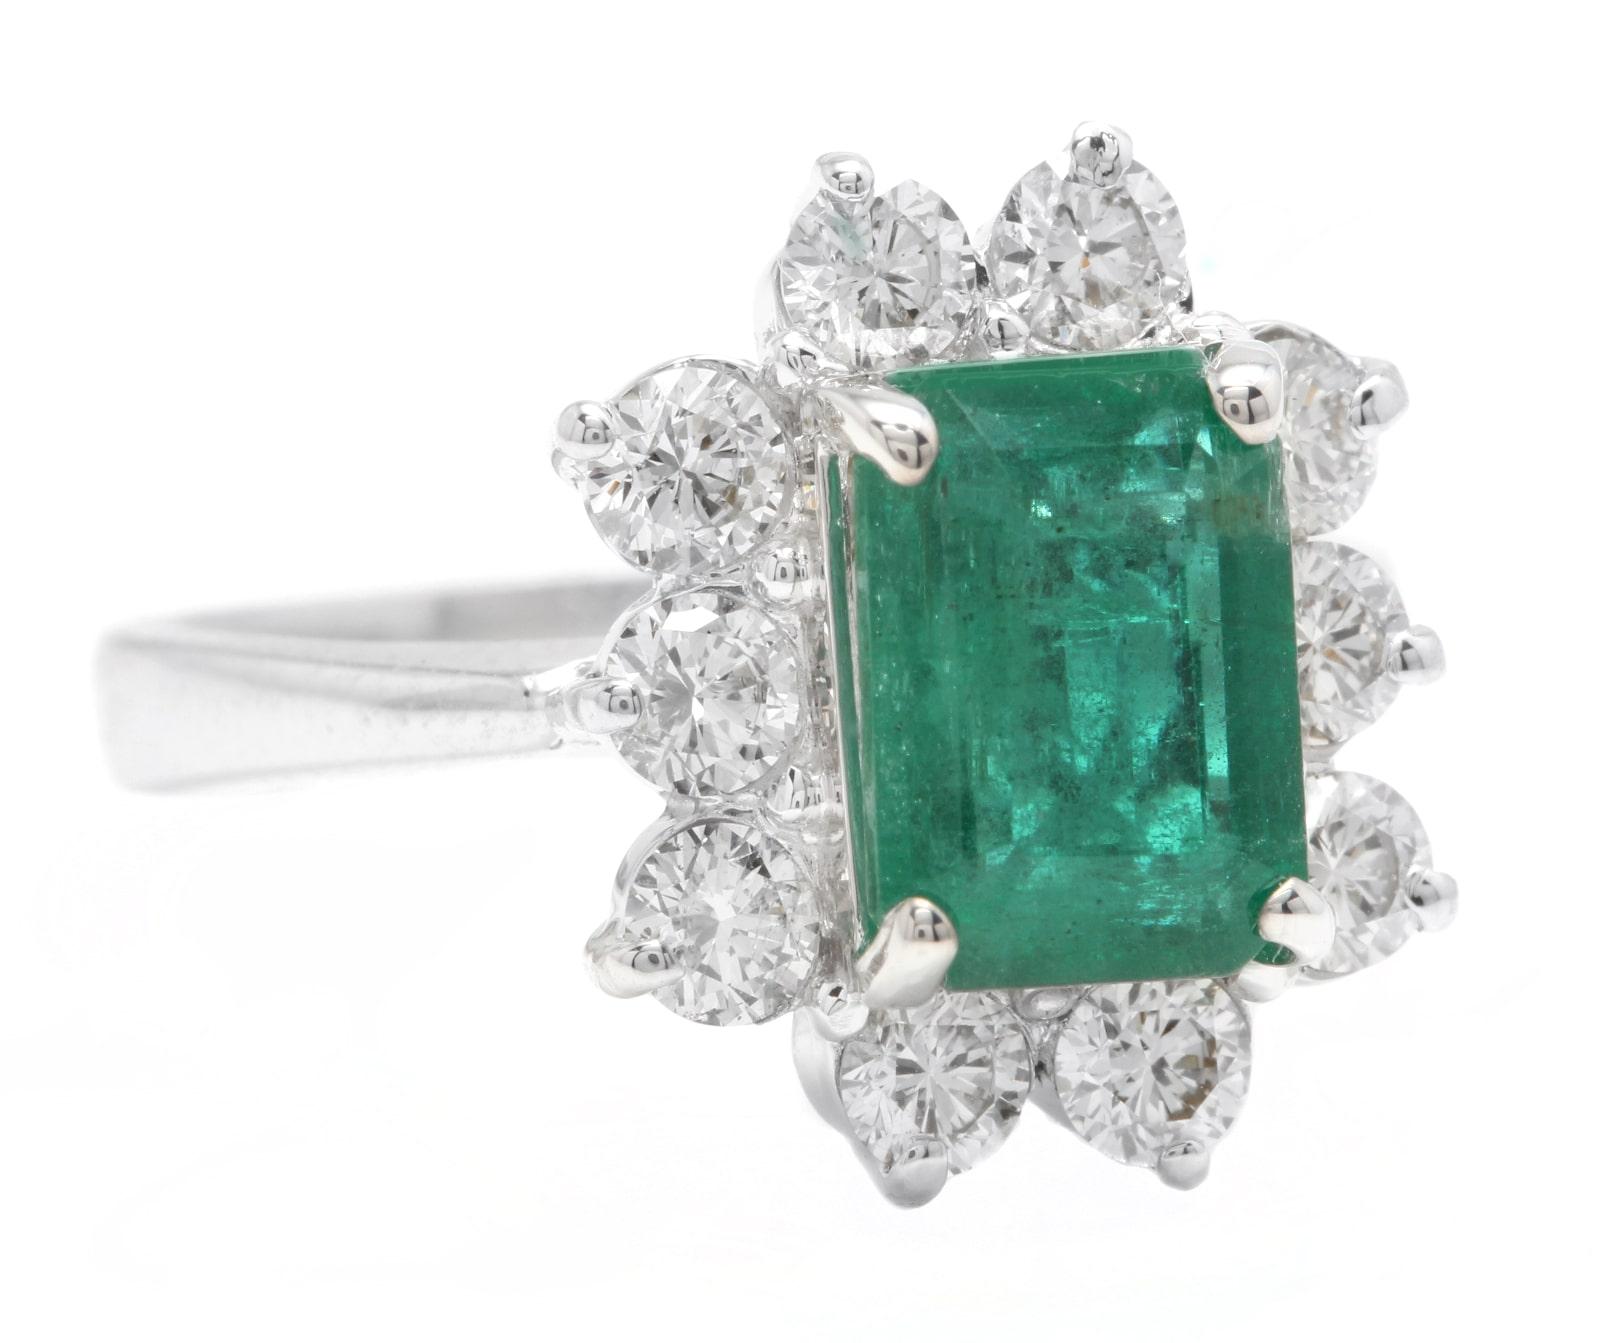 4.00 Carats Natural Emerald and Diamond 18K Solid White Gold Ring

Suggested Replacement Value: Approx. $6,500.00

Total Natural Green Emerald Weight is: Approx. 3.00 Carats (transparent)

Emerald Measures: Approx. 9 x 7mm

Emerald Treatment: